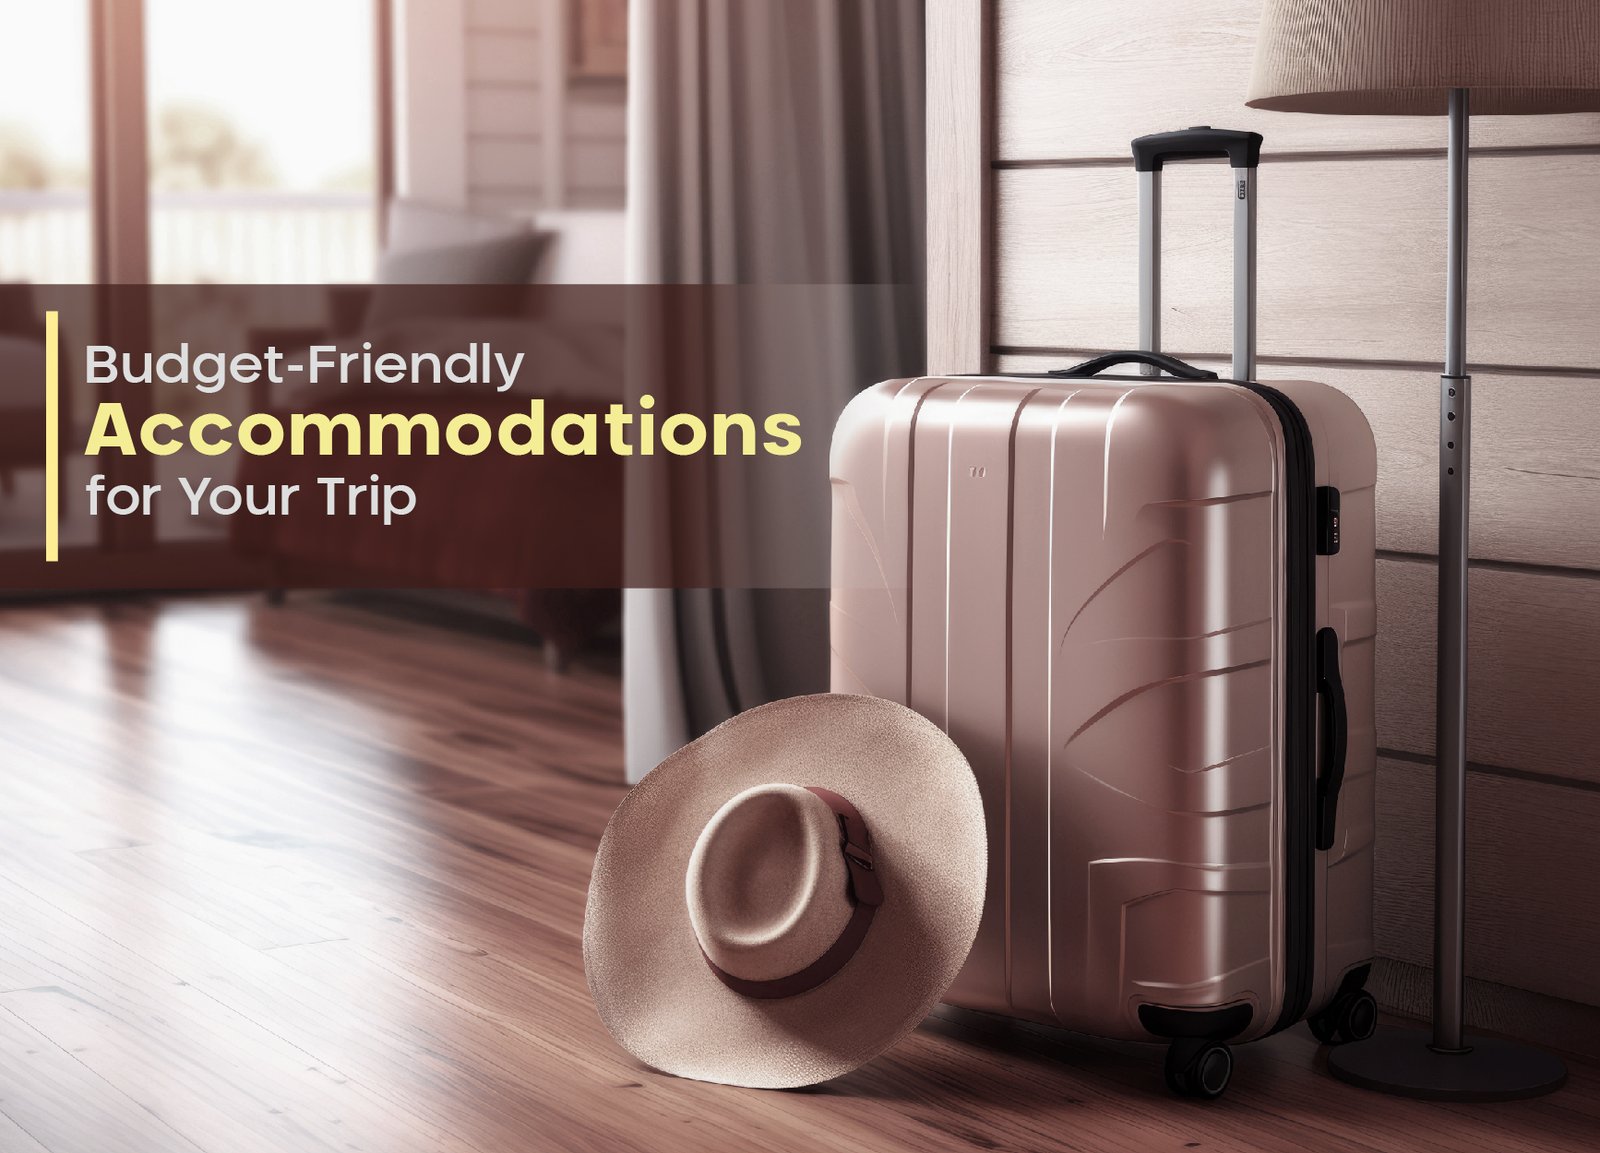 Budget-Friendly Accommodations for Your Trip